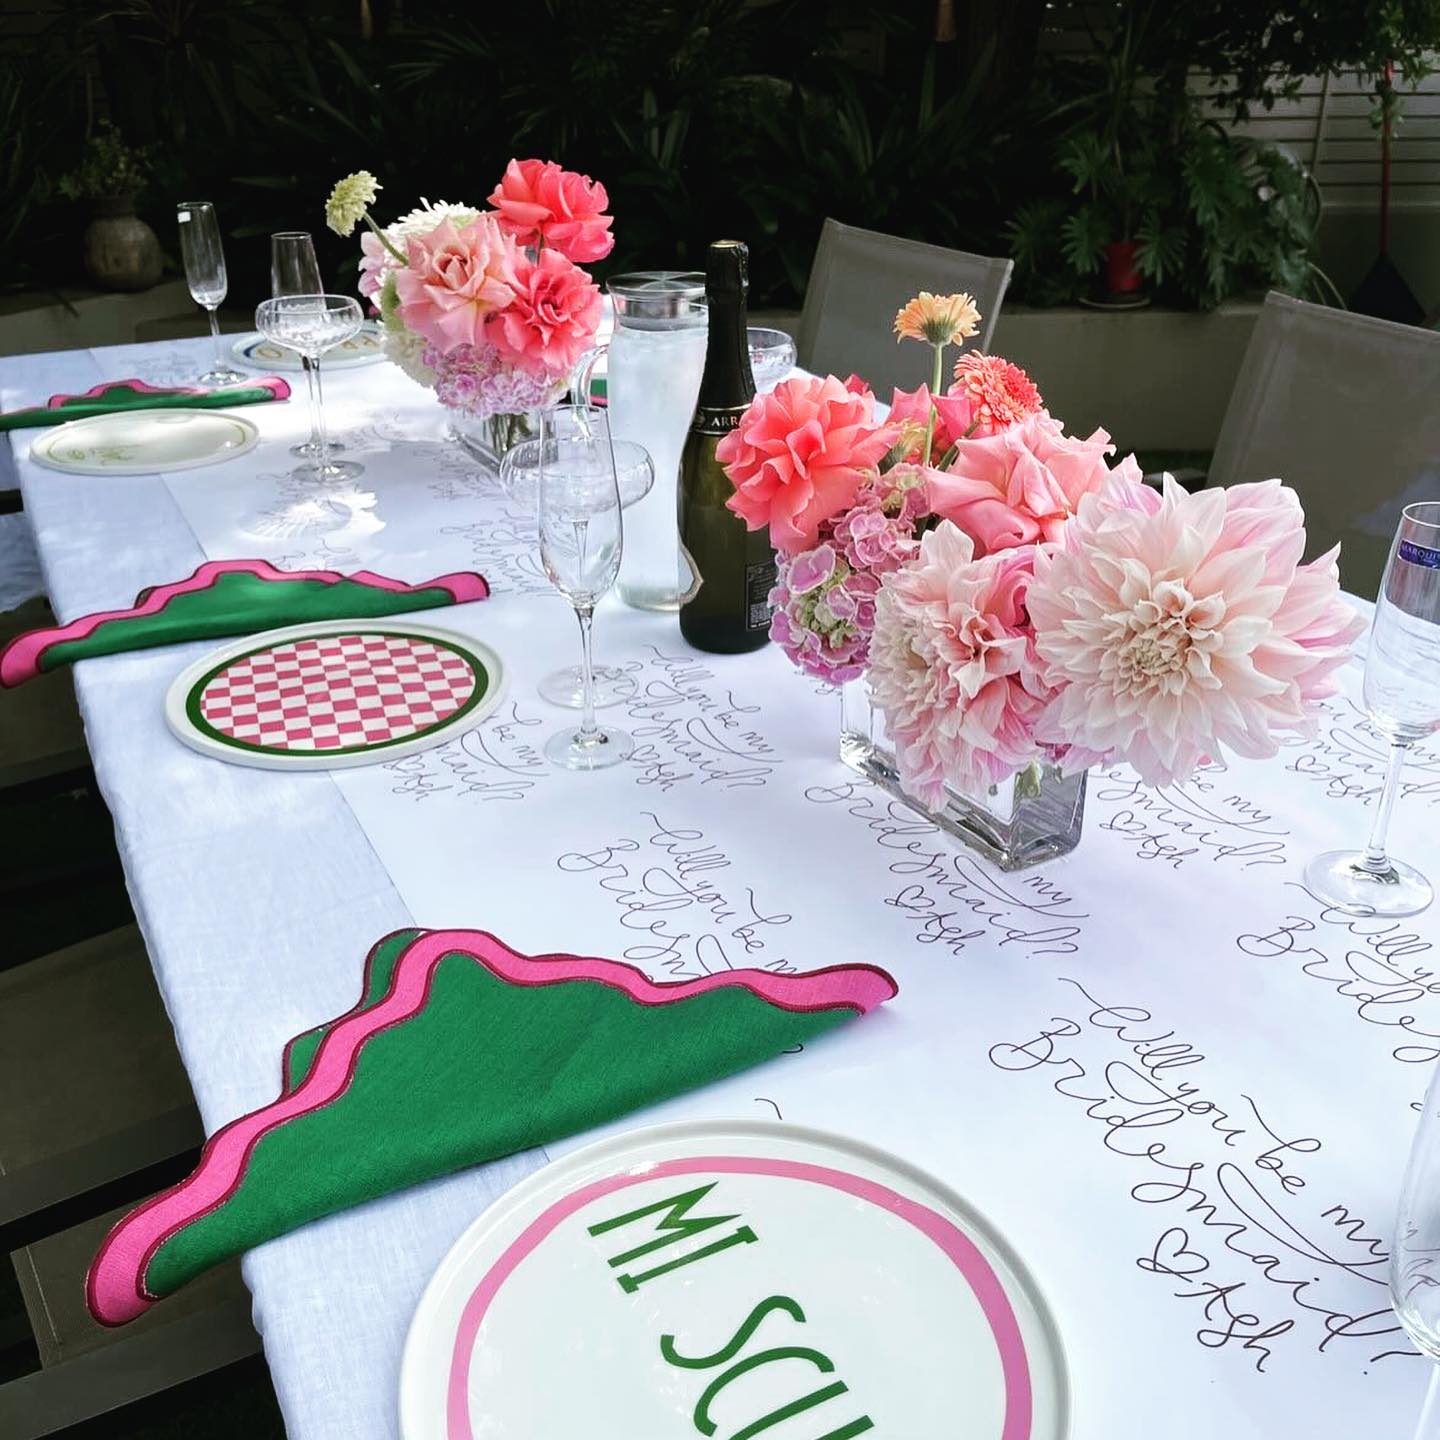 Tablescape with 'Will you be my bridesmaid'  handwritten on the table cloth decorated with bright green and pink scalloped edged napkins and pink floral centre pieces 